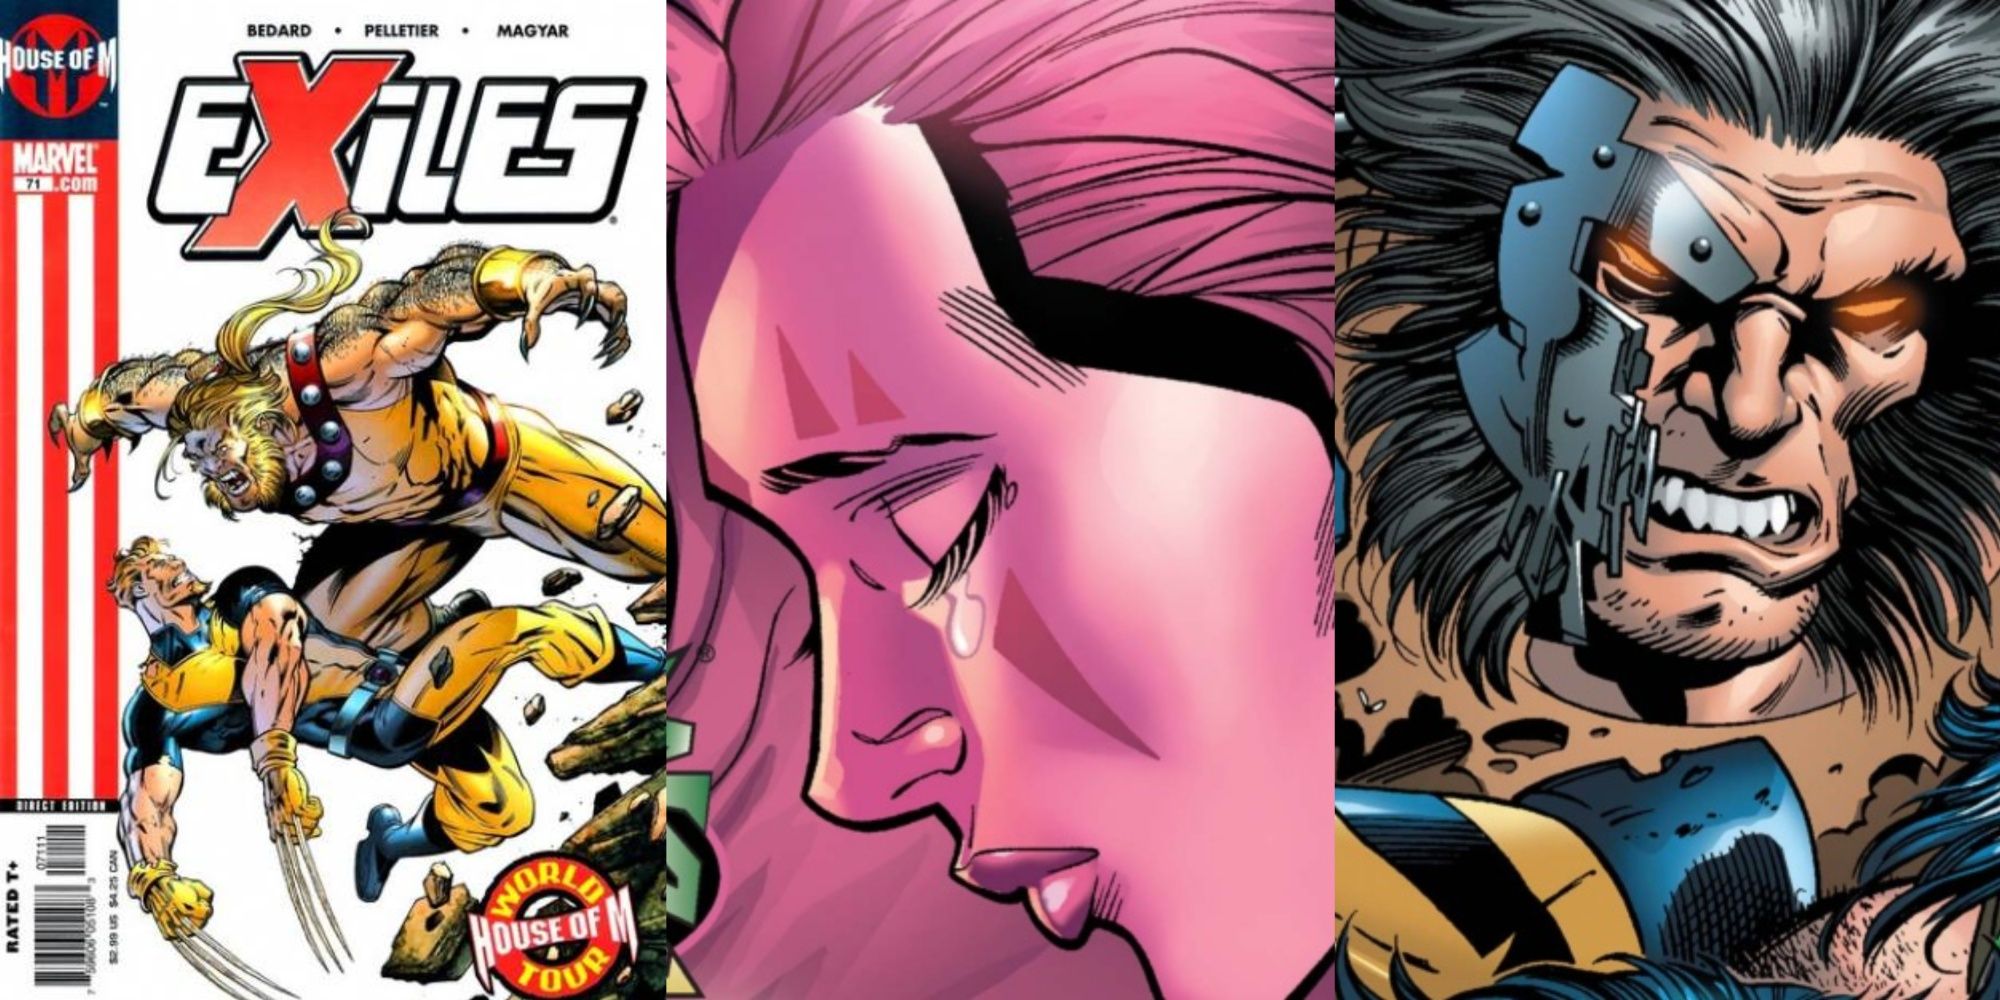 Split Image comic covers from Exiles with Mimic battling Sabretooth, Blink crying, and wolverine